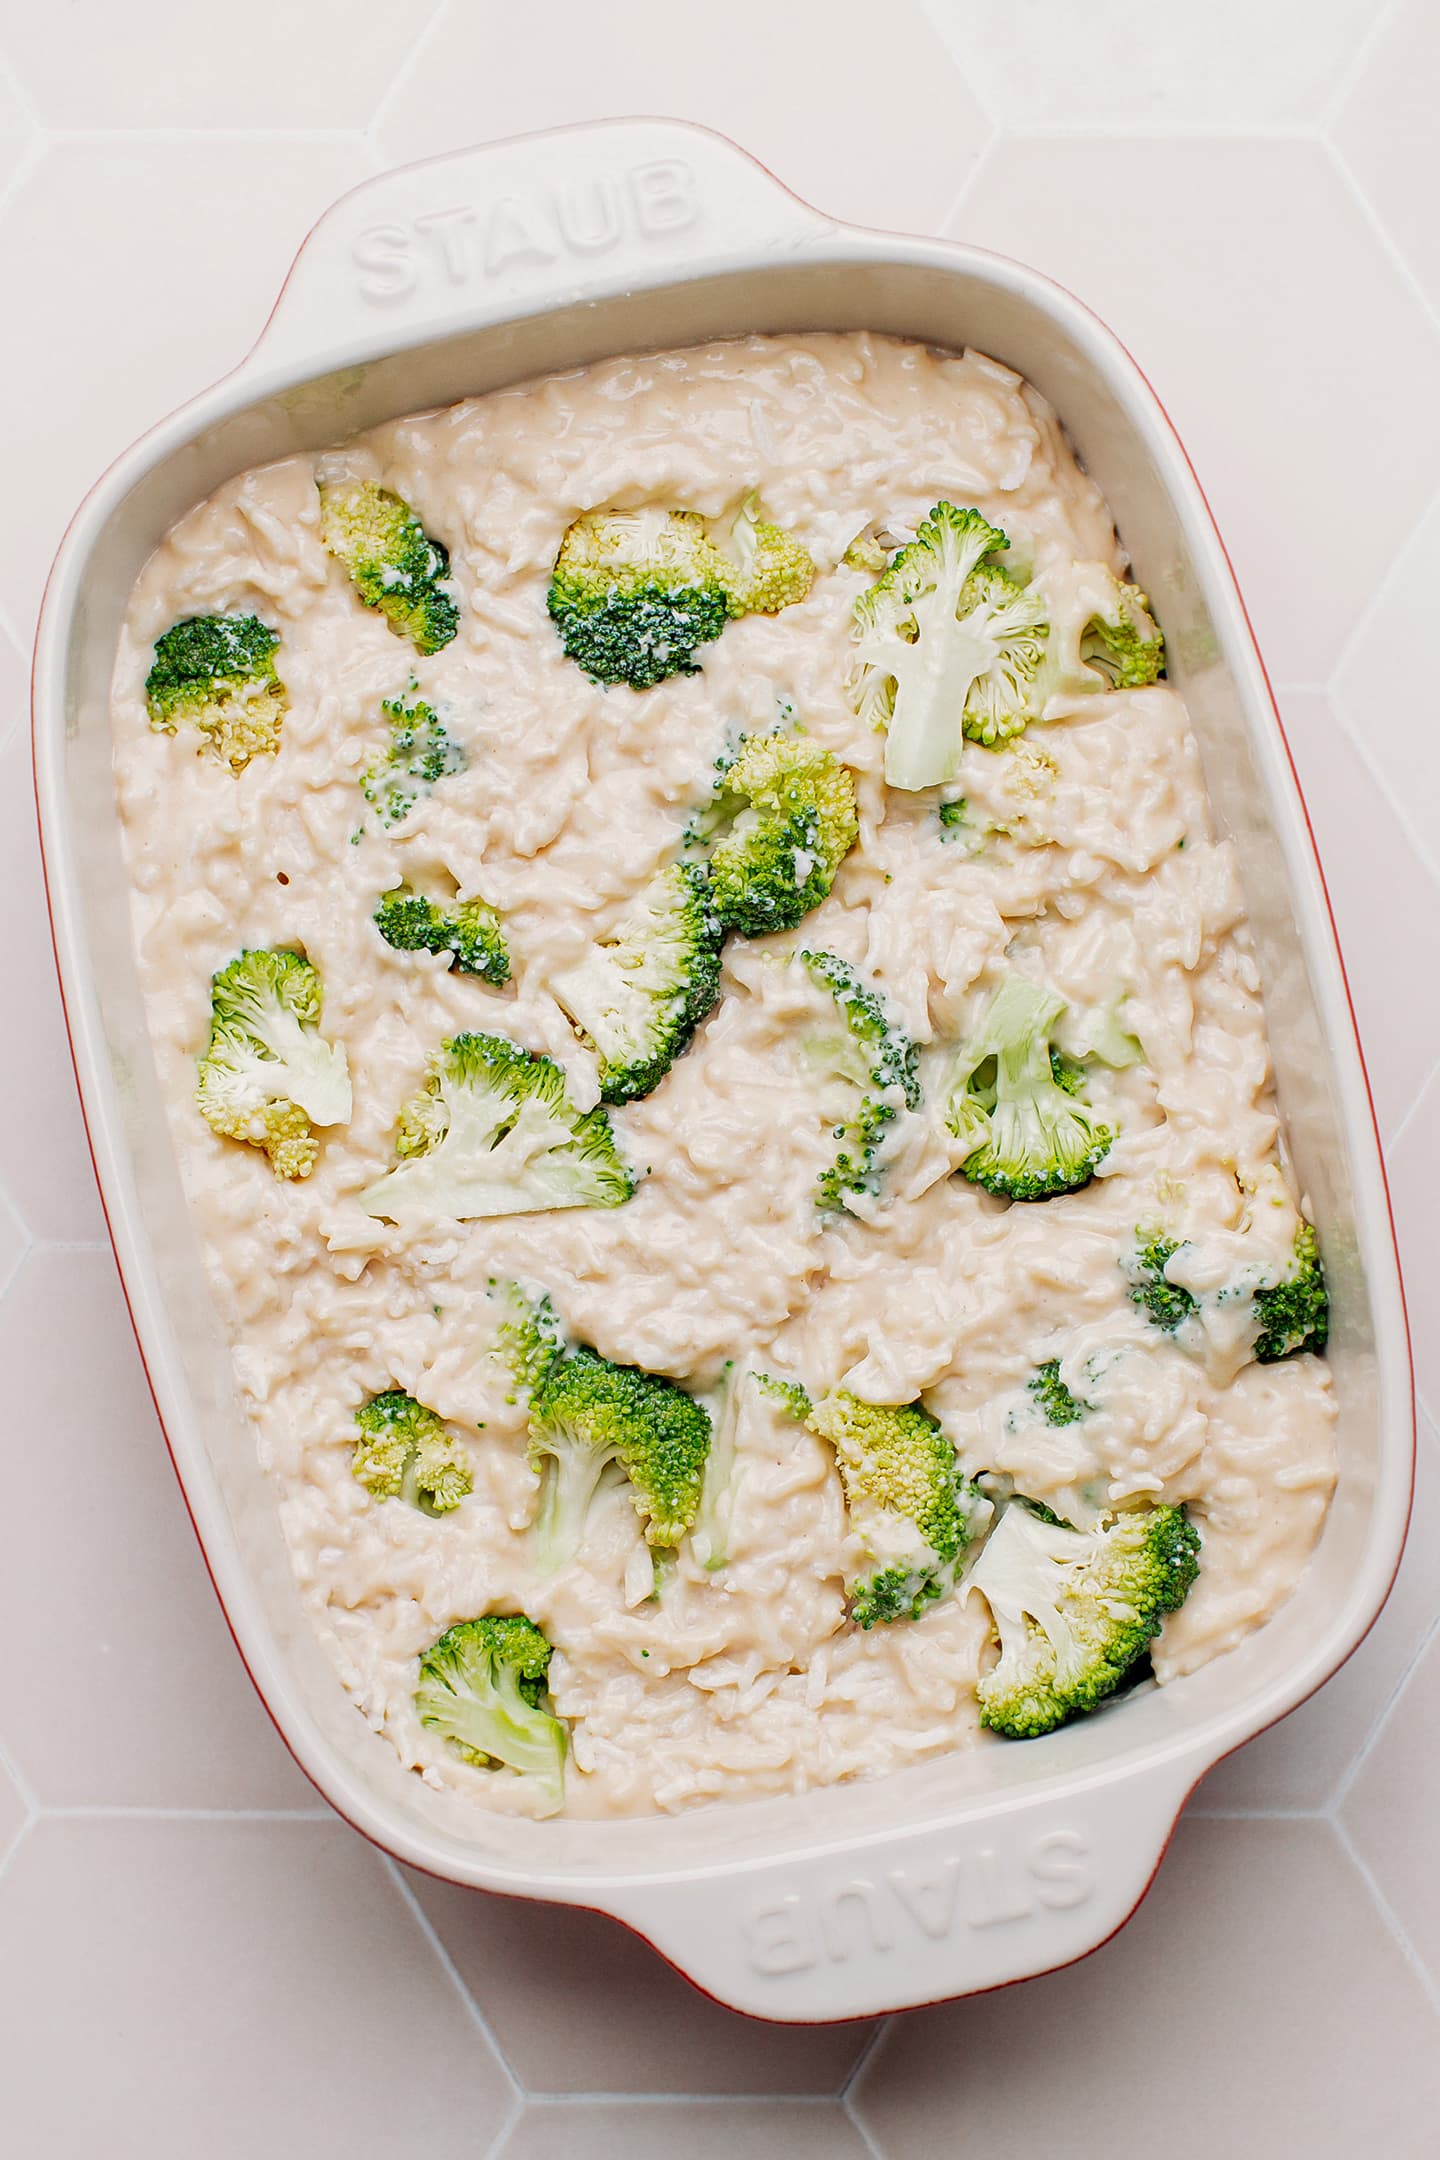 Unbaked broccoli and rice casserole.